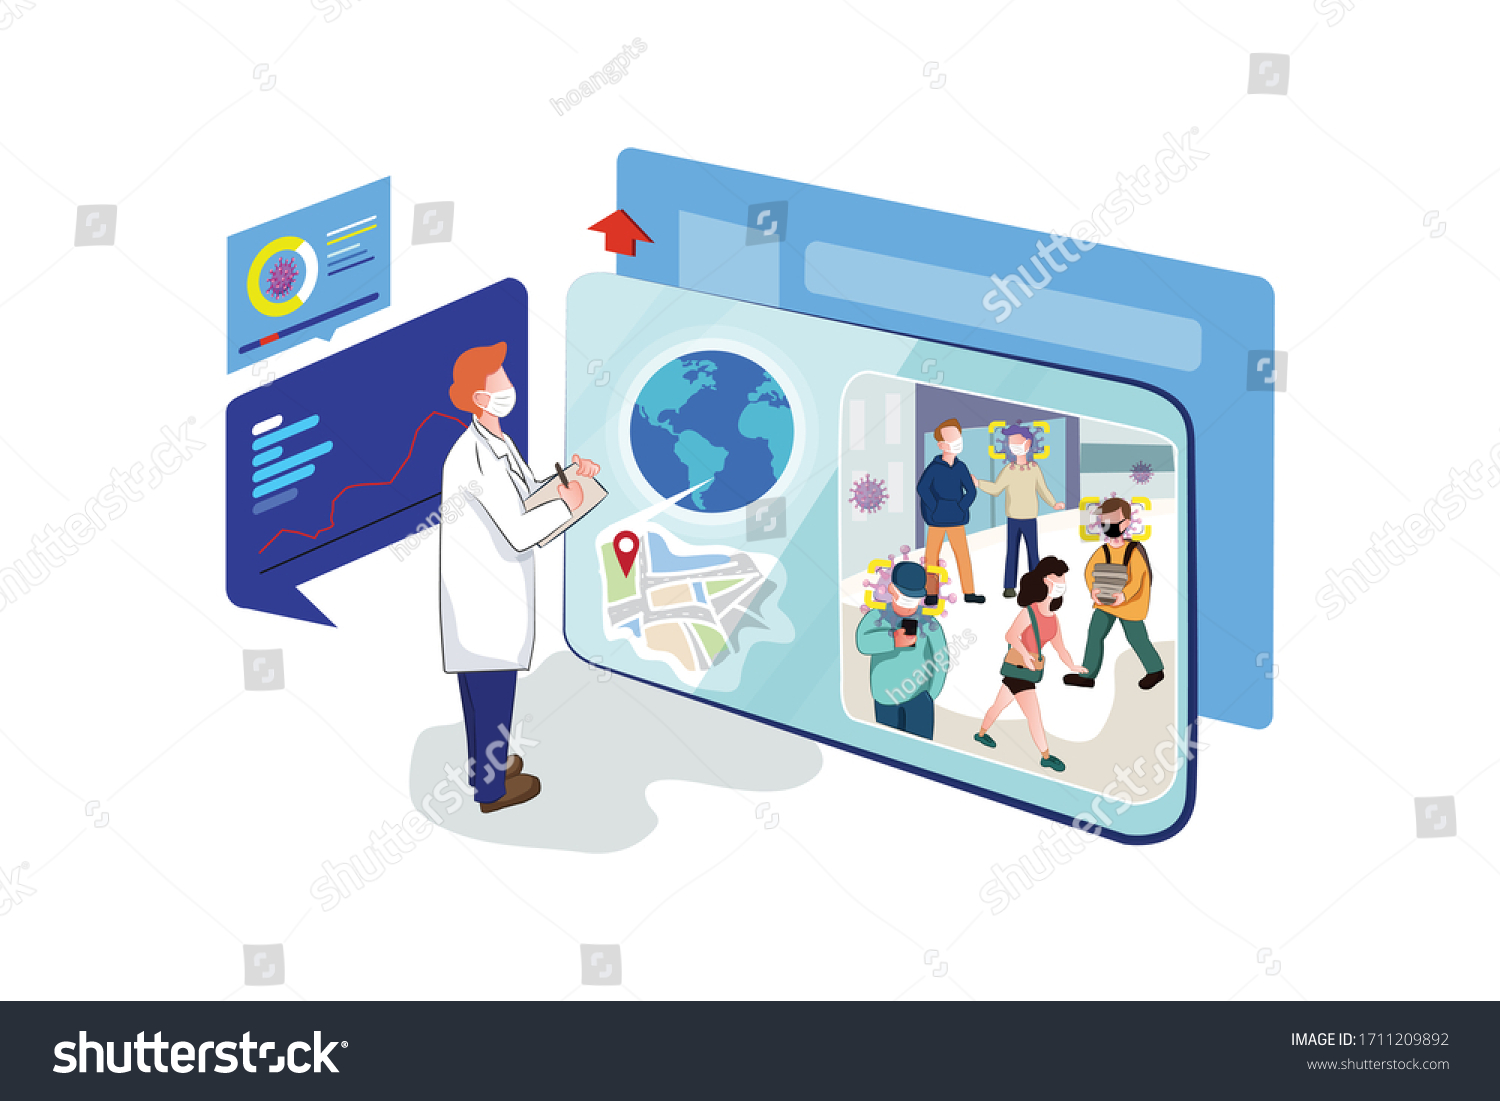 SVG of Corona Virus Suspect Tracking concept. Flat vector illustration isolated on white background. svg